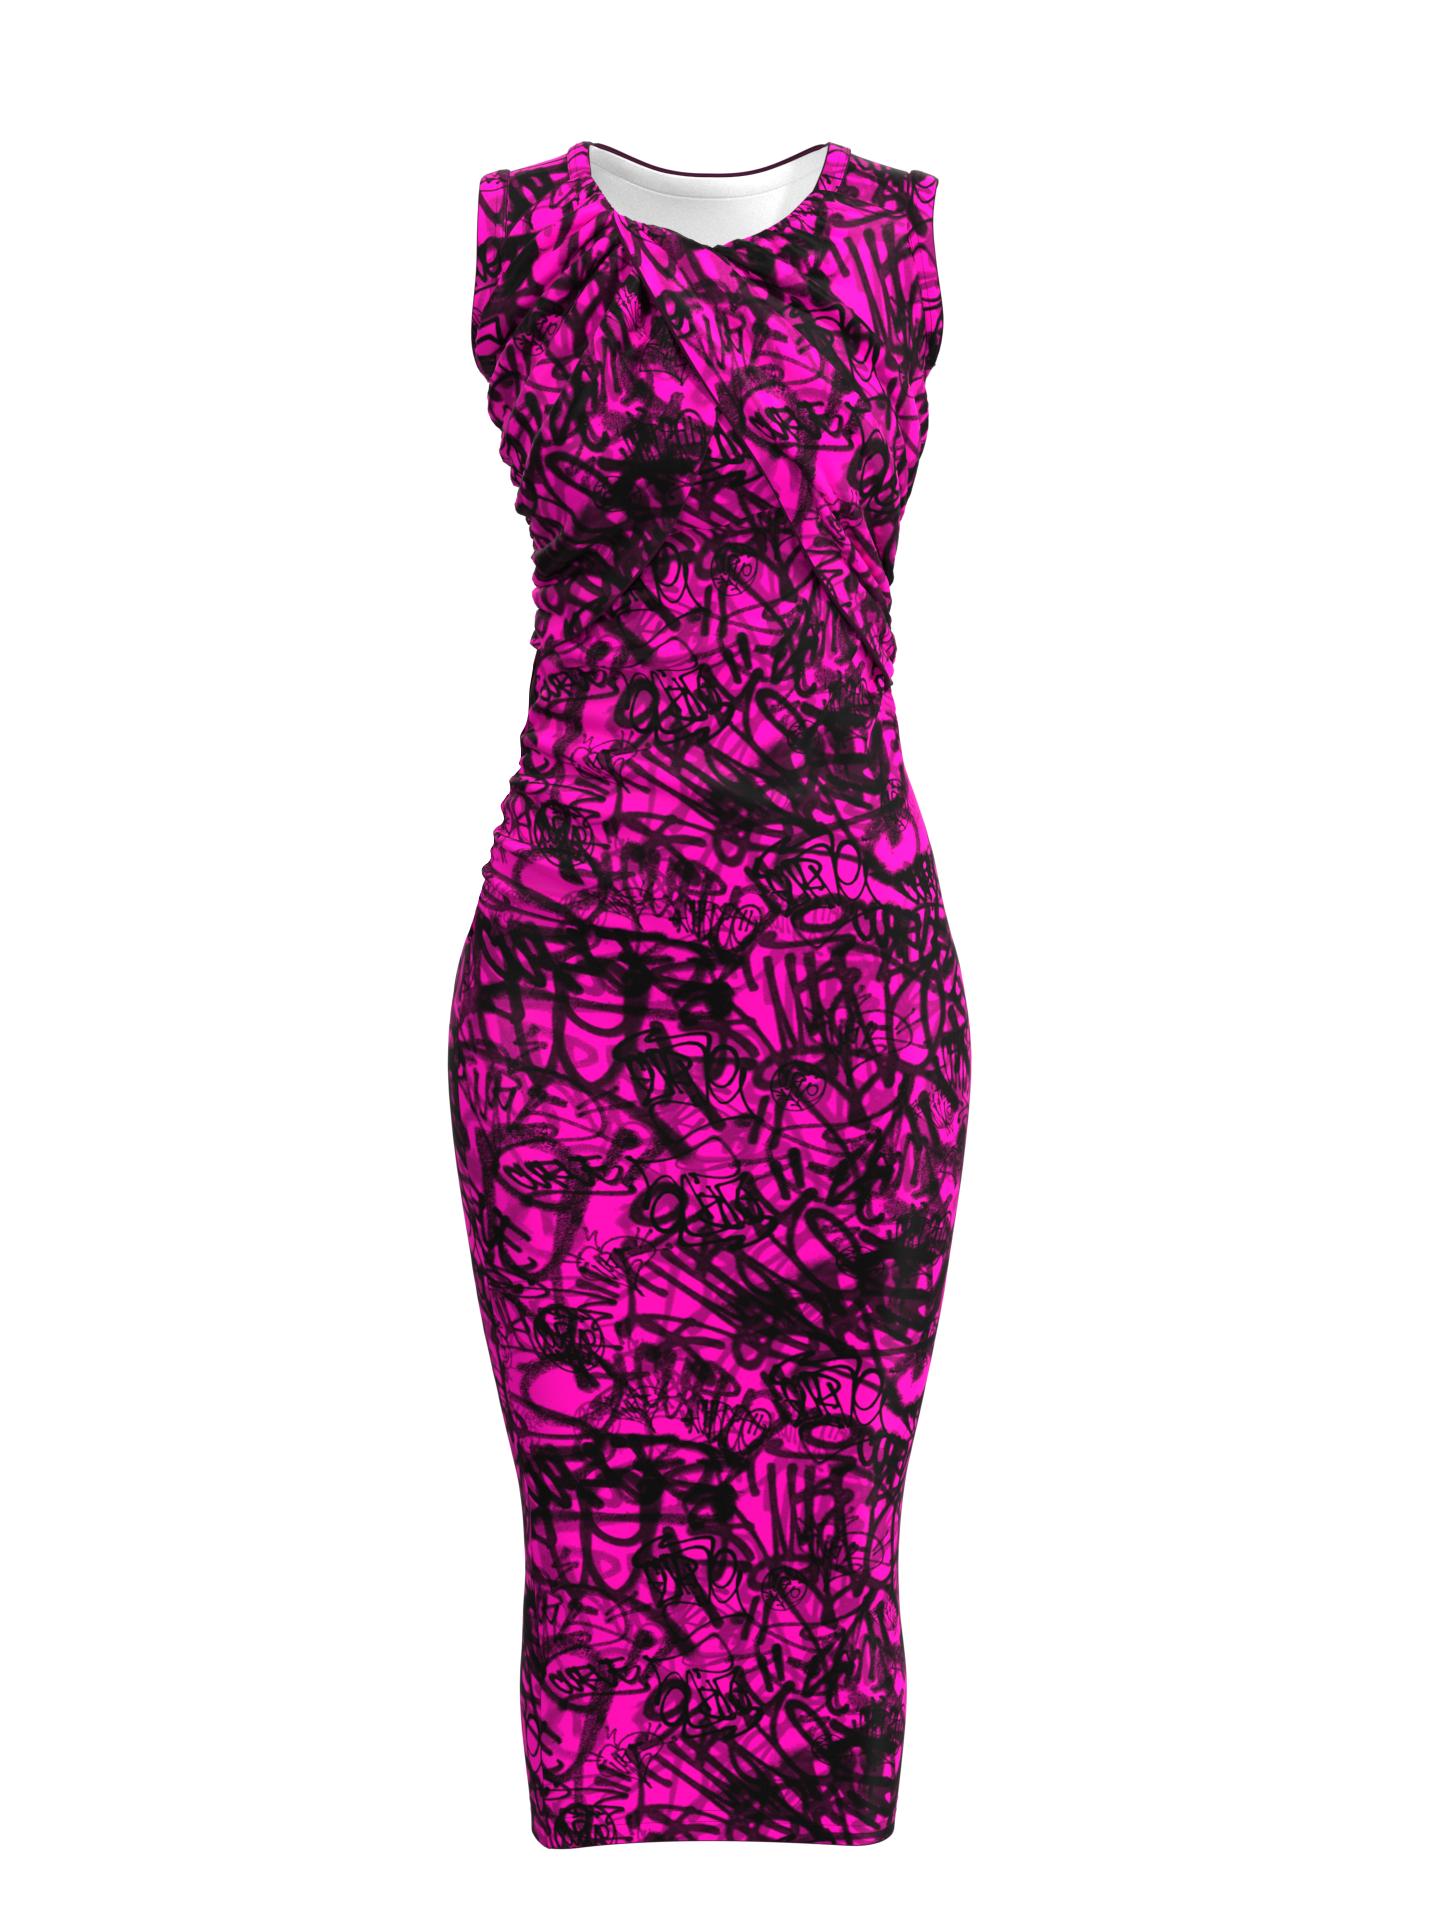 The Lily Dress - Curvazoid Magenta (Women's) by ASSEMBLY.FASHION NYFW 2021 DROP NO.01